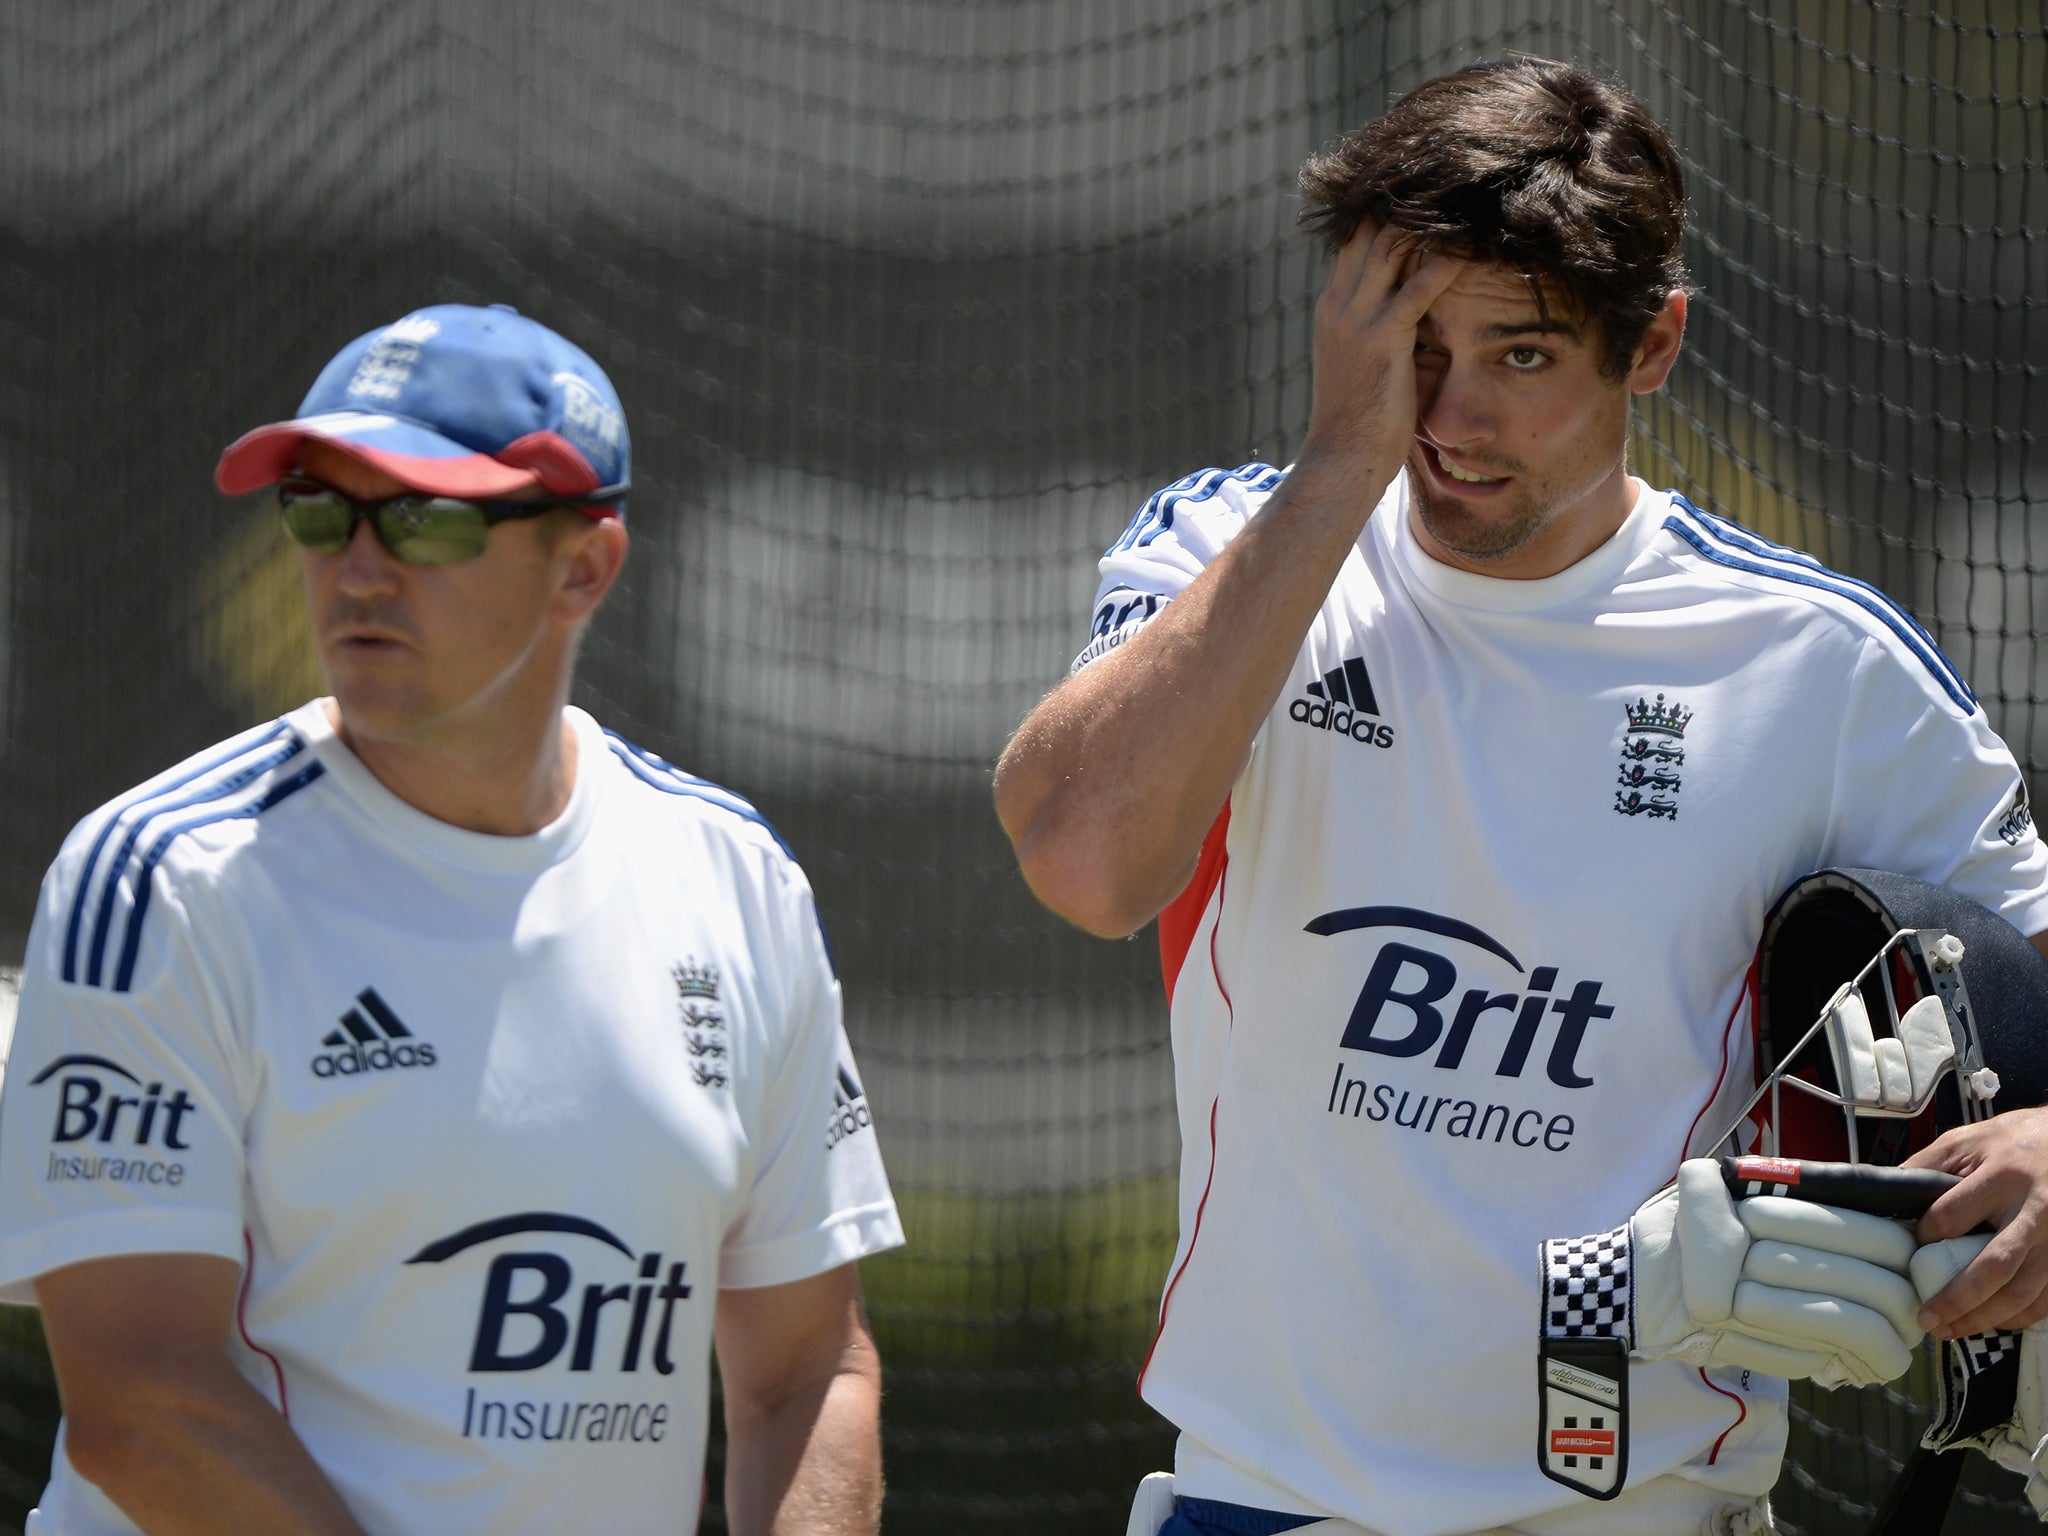 England coach Andy Flower (L) and captain Alastair Cook (R) look set to continue in their roles despite coming under-fire for the dismal Ashes series performance